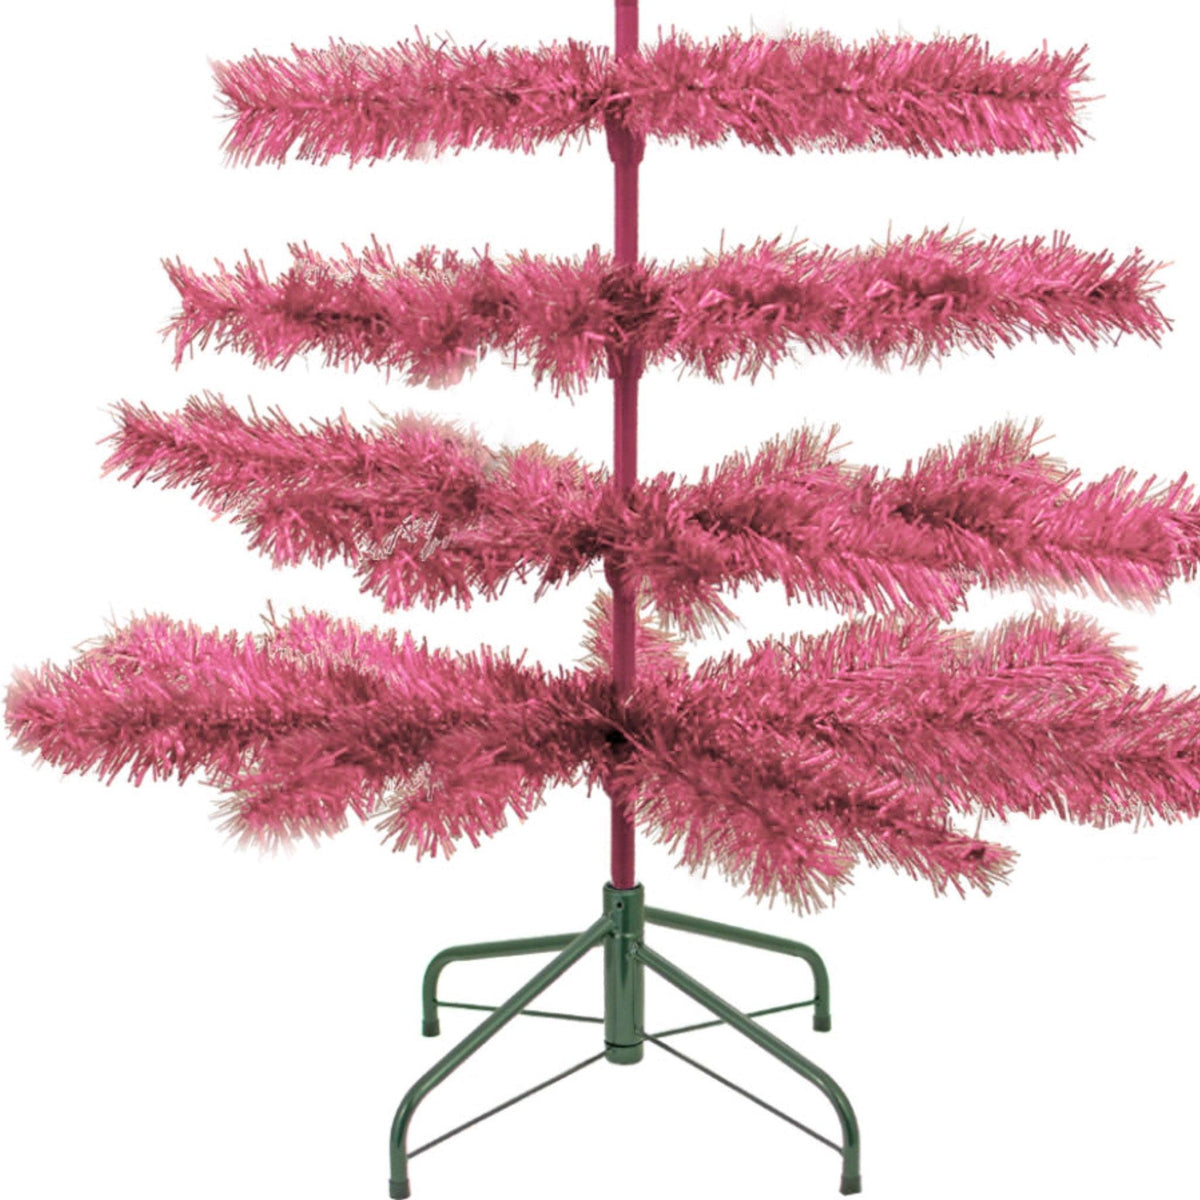 6FT Pink Tinsel Christmas Trees comes with a green metal stand.